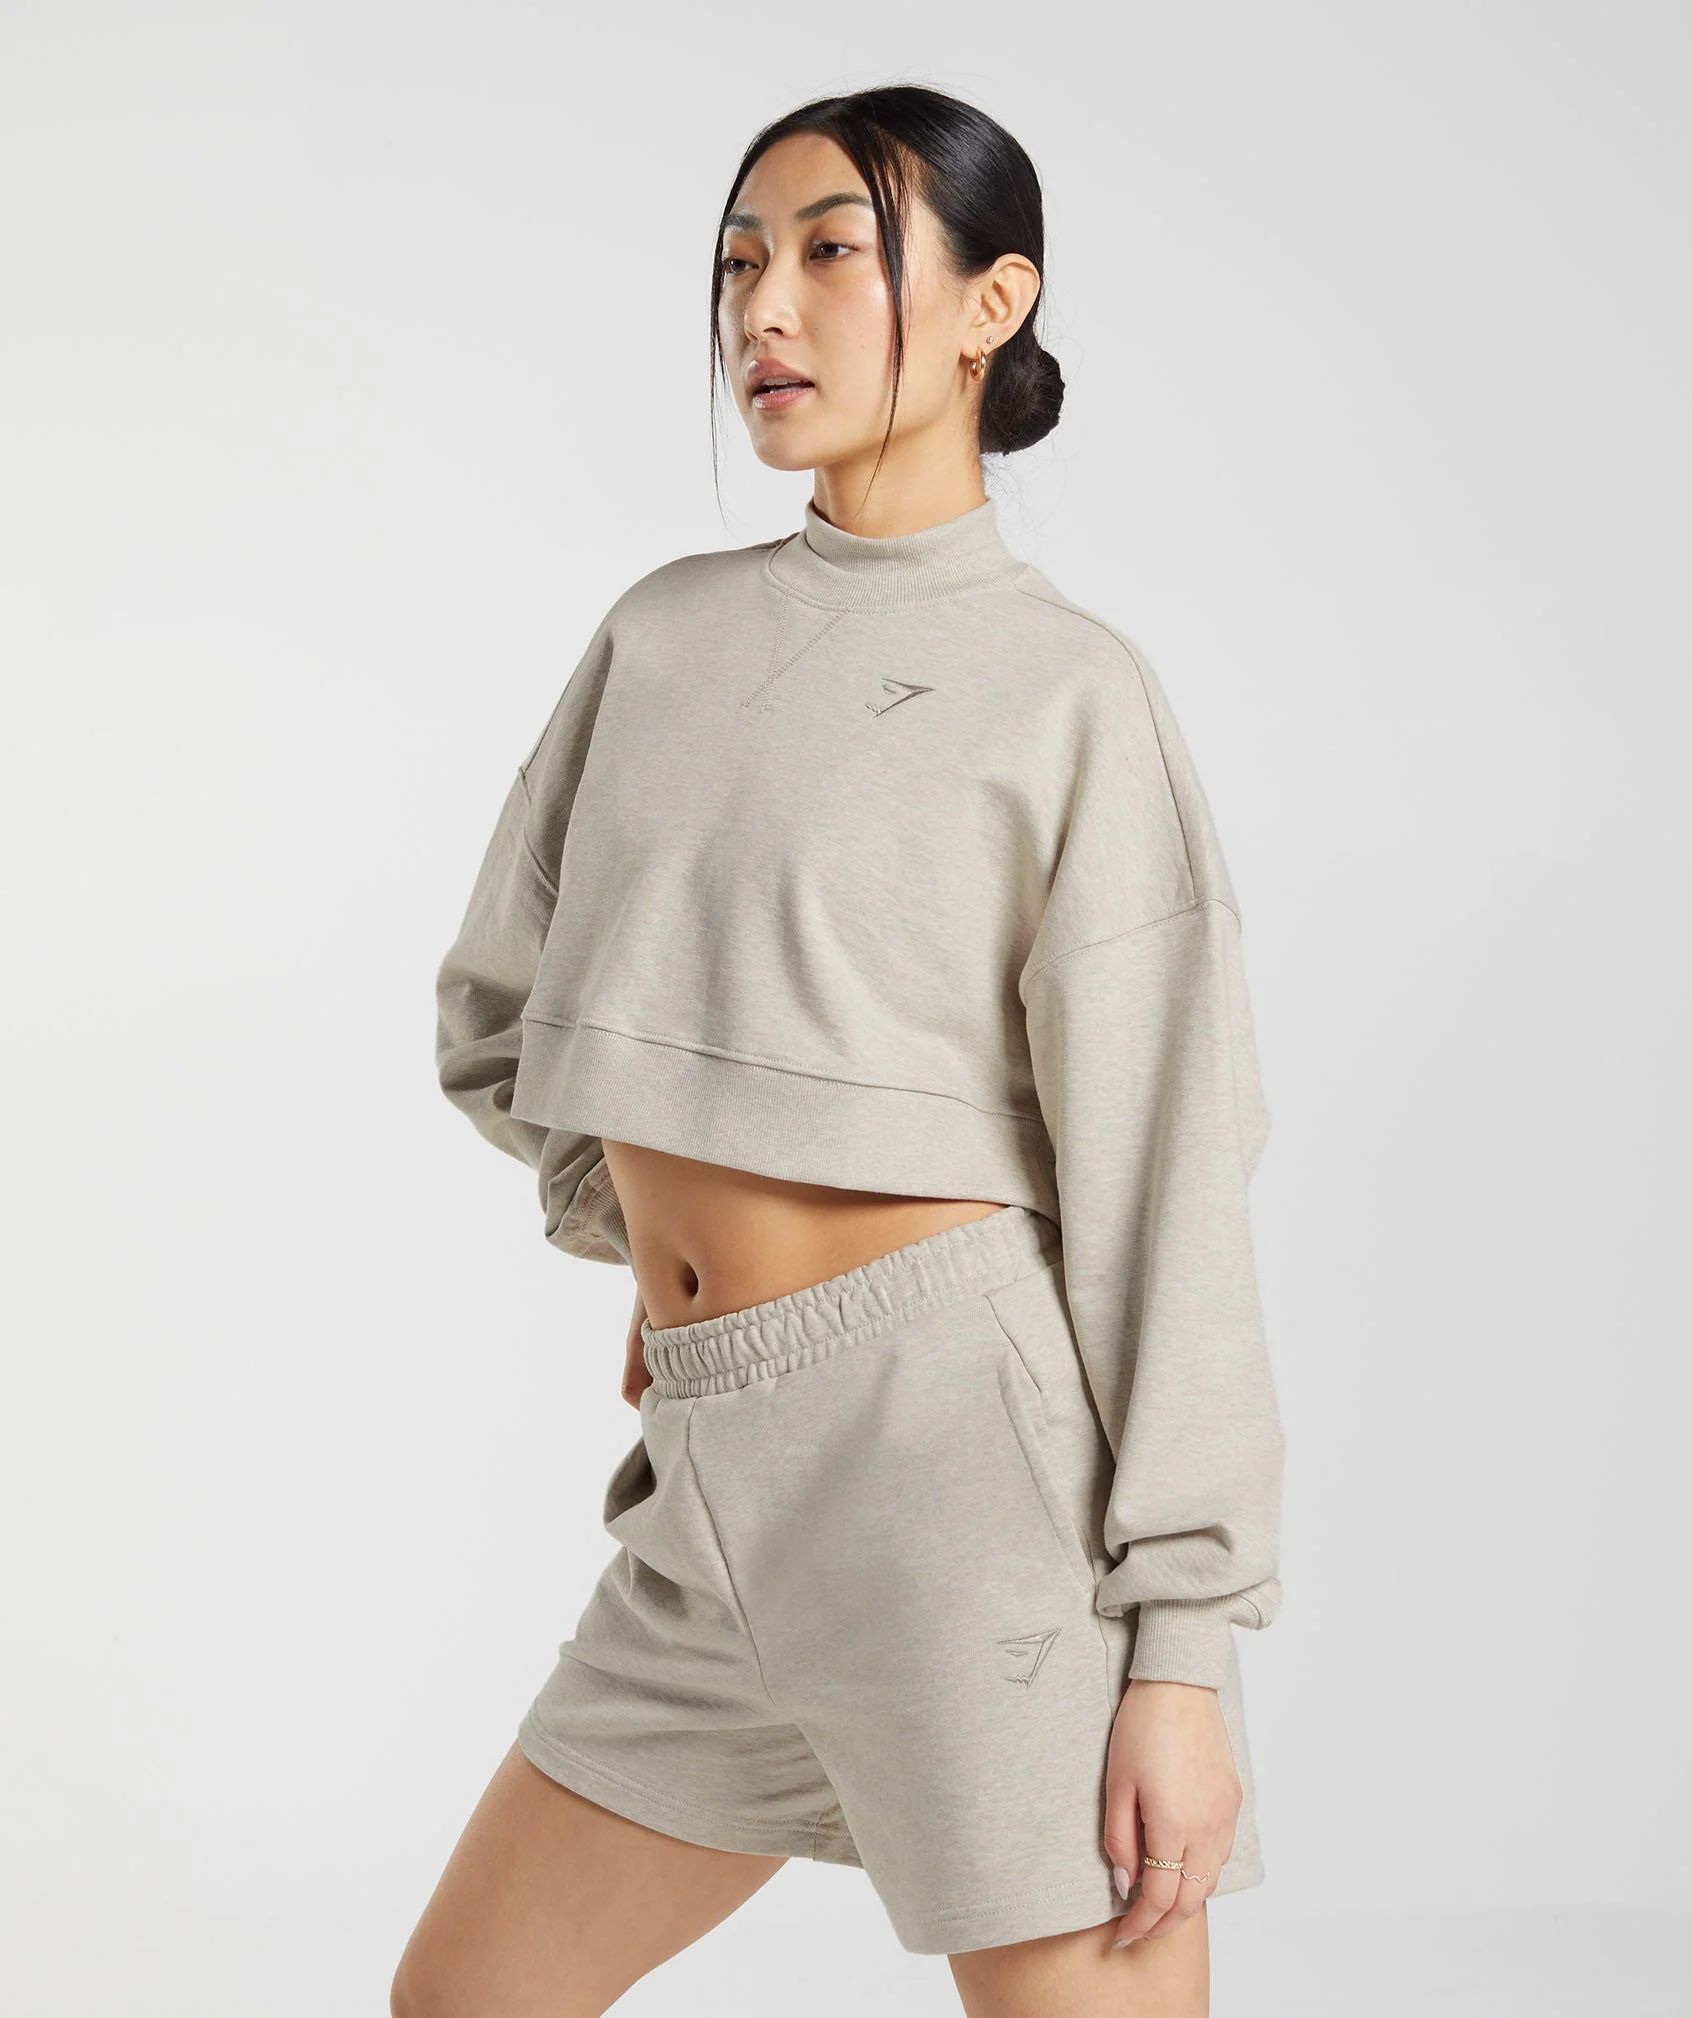 Gymshark Rest Day Sweats Cropped Pullover - Sand Marl | Gymshark US